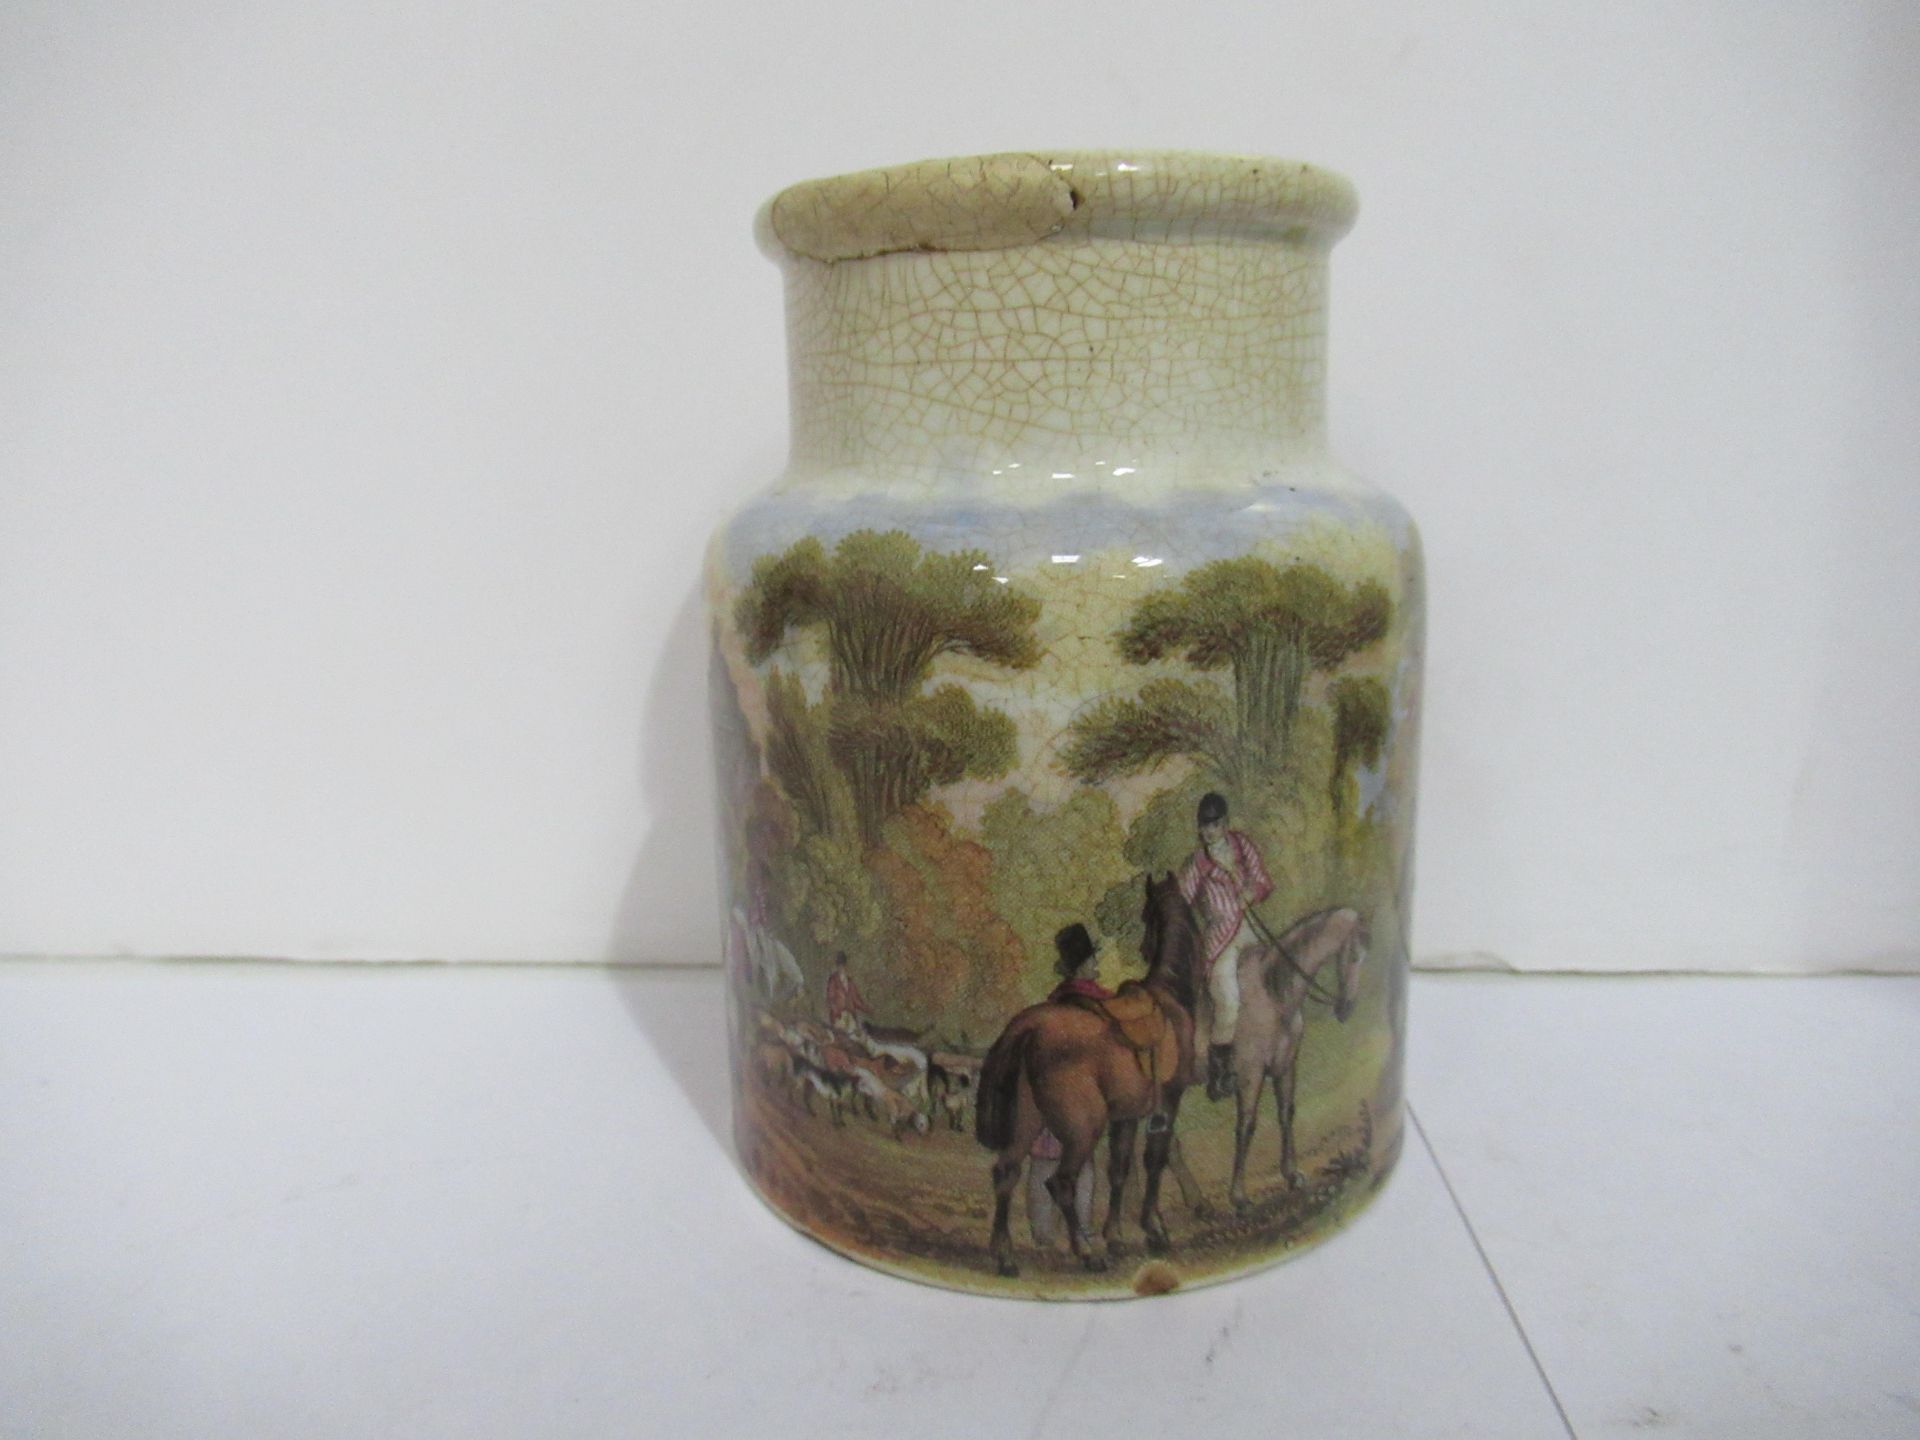 6x Prattware painted jars including one depicting Venice - Image 36 of 42